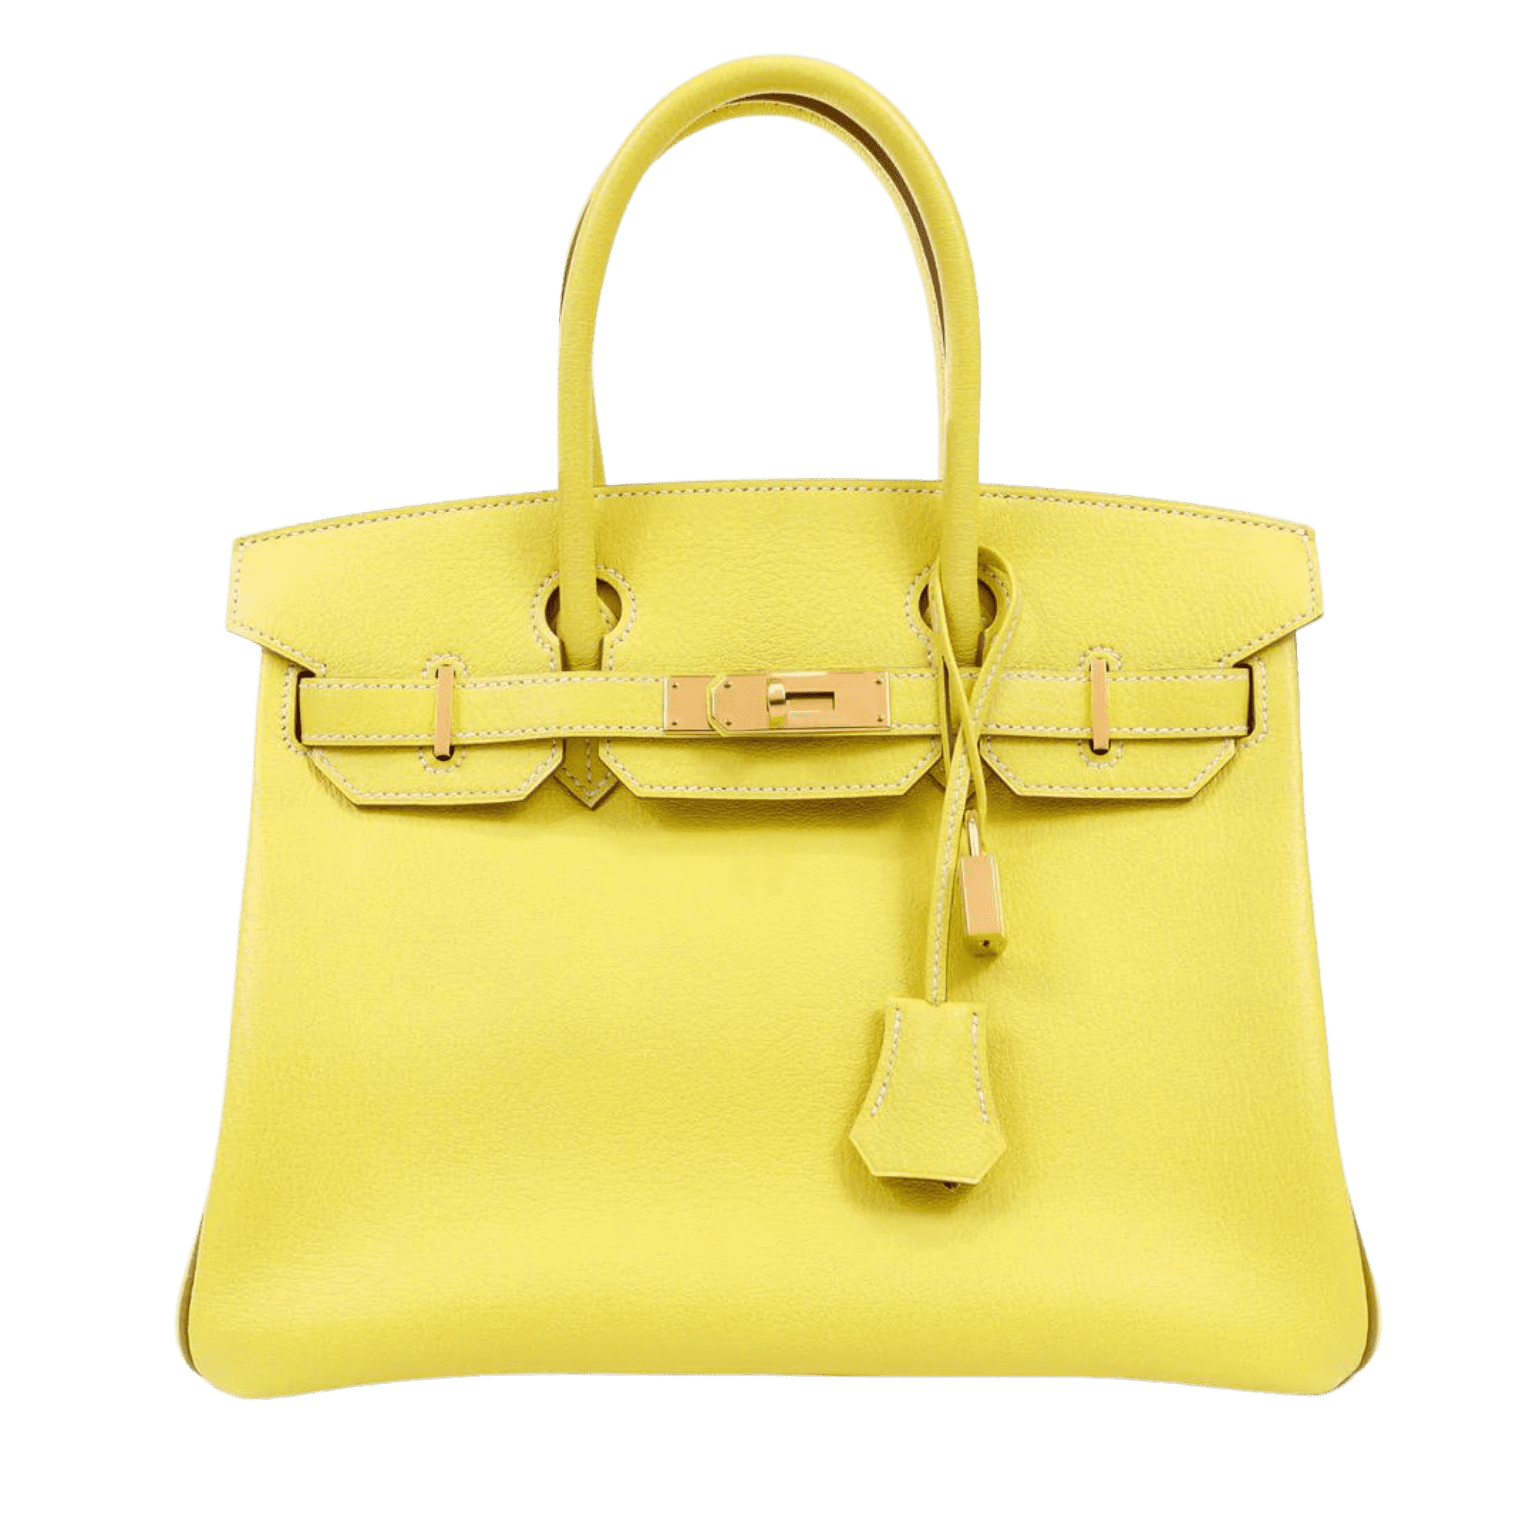 Hermes Birkin HAC anise green with gold hardware Chevre leather